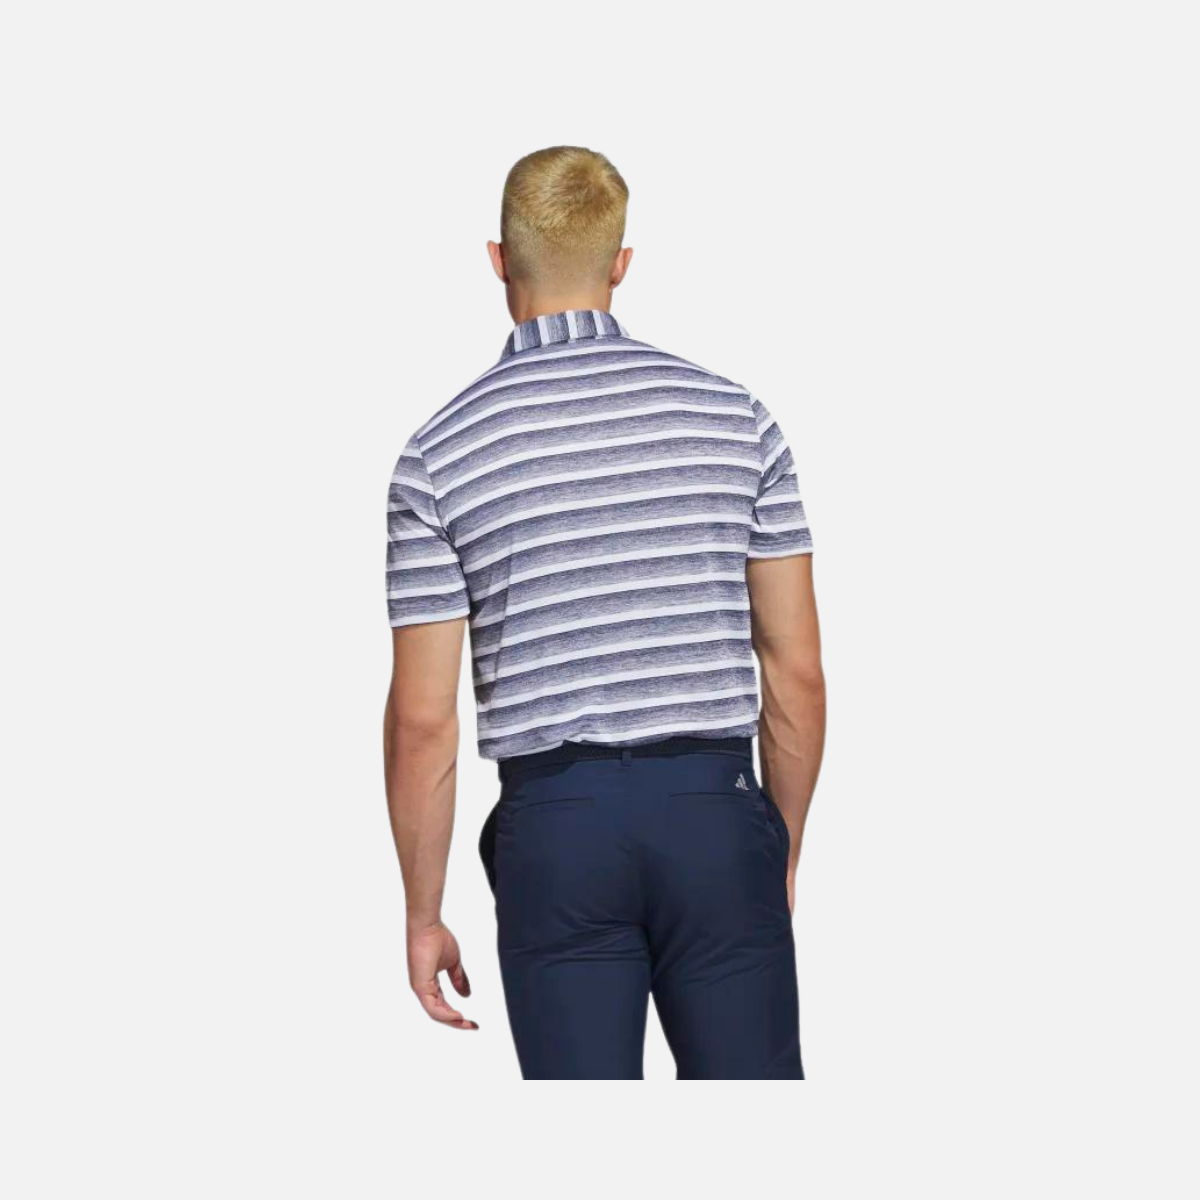 Adidas Two-Color Striped Polo Shirt -Collegiate Navy/White